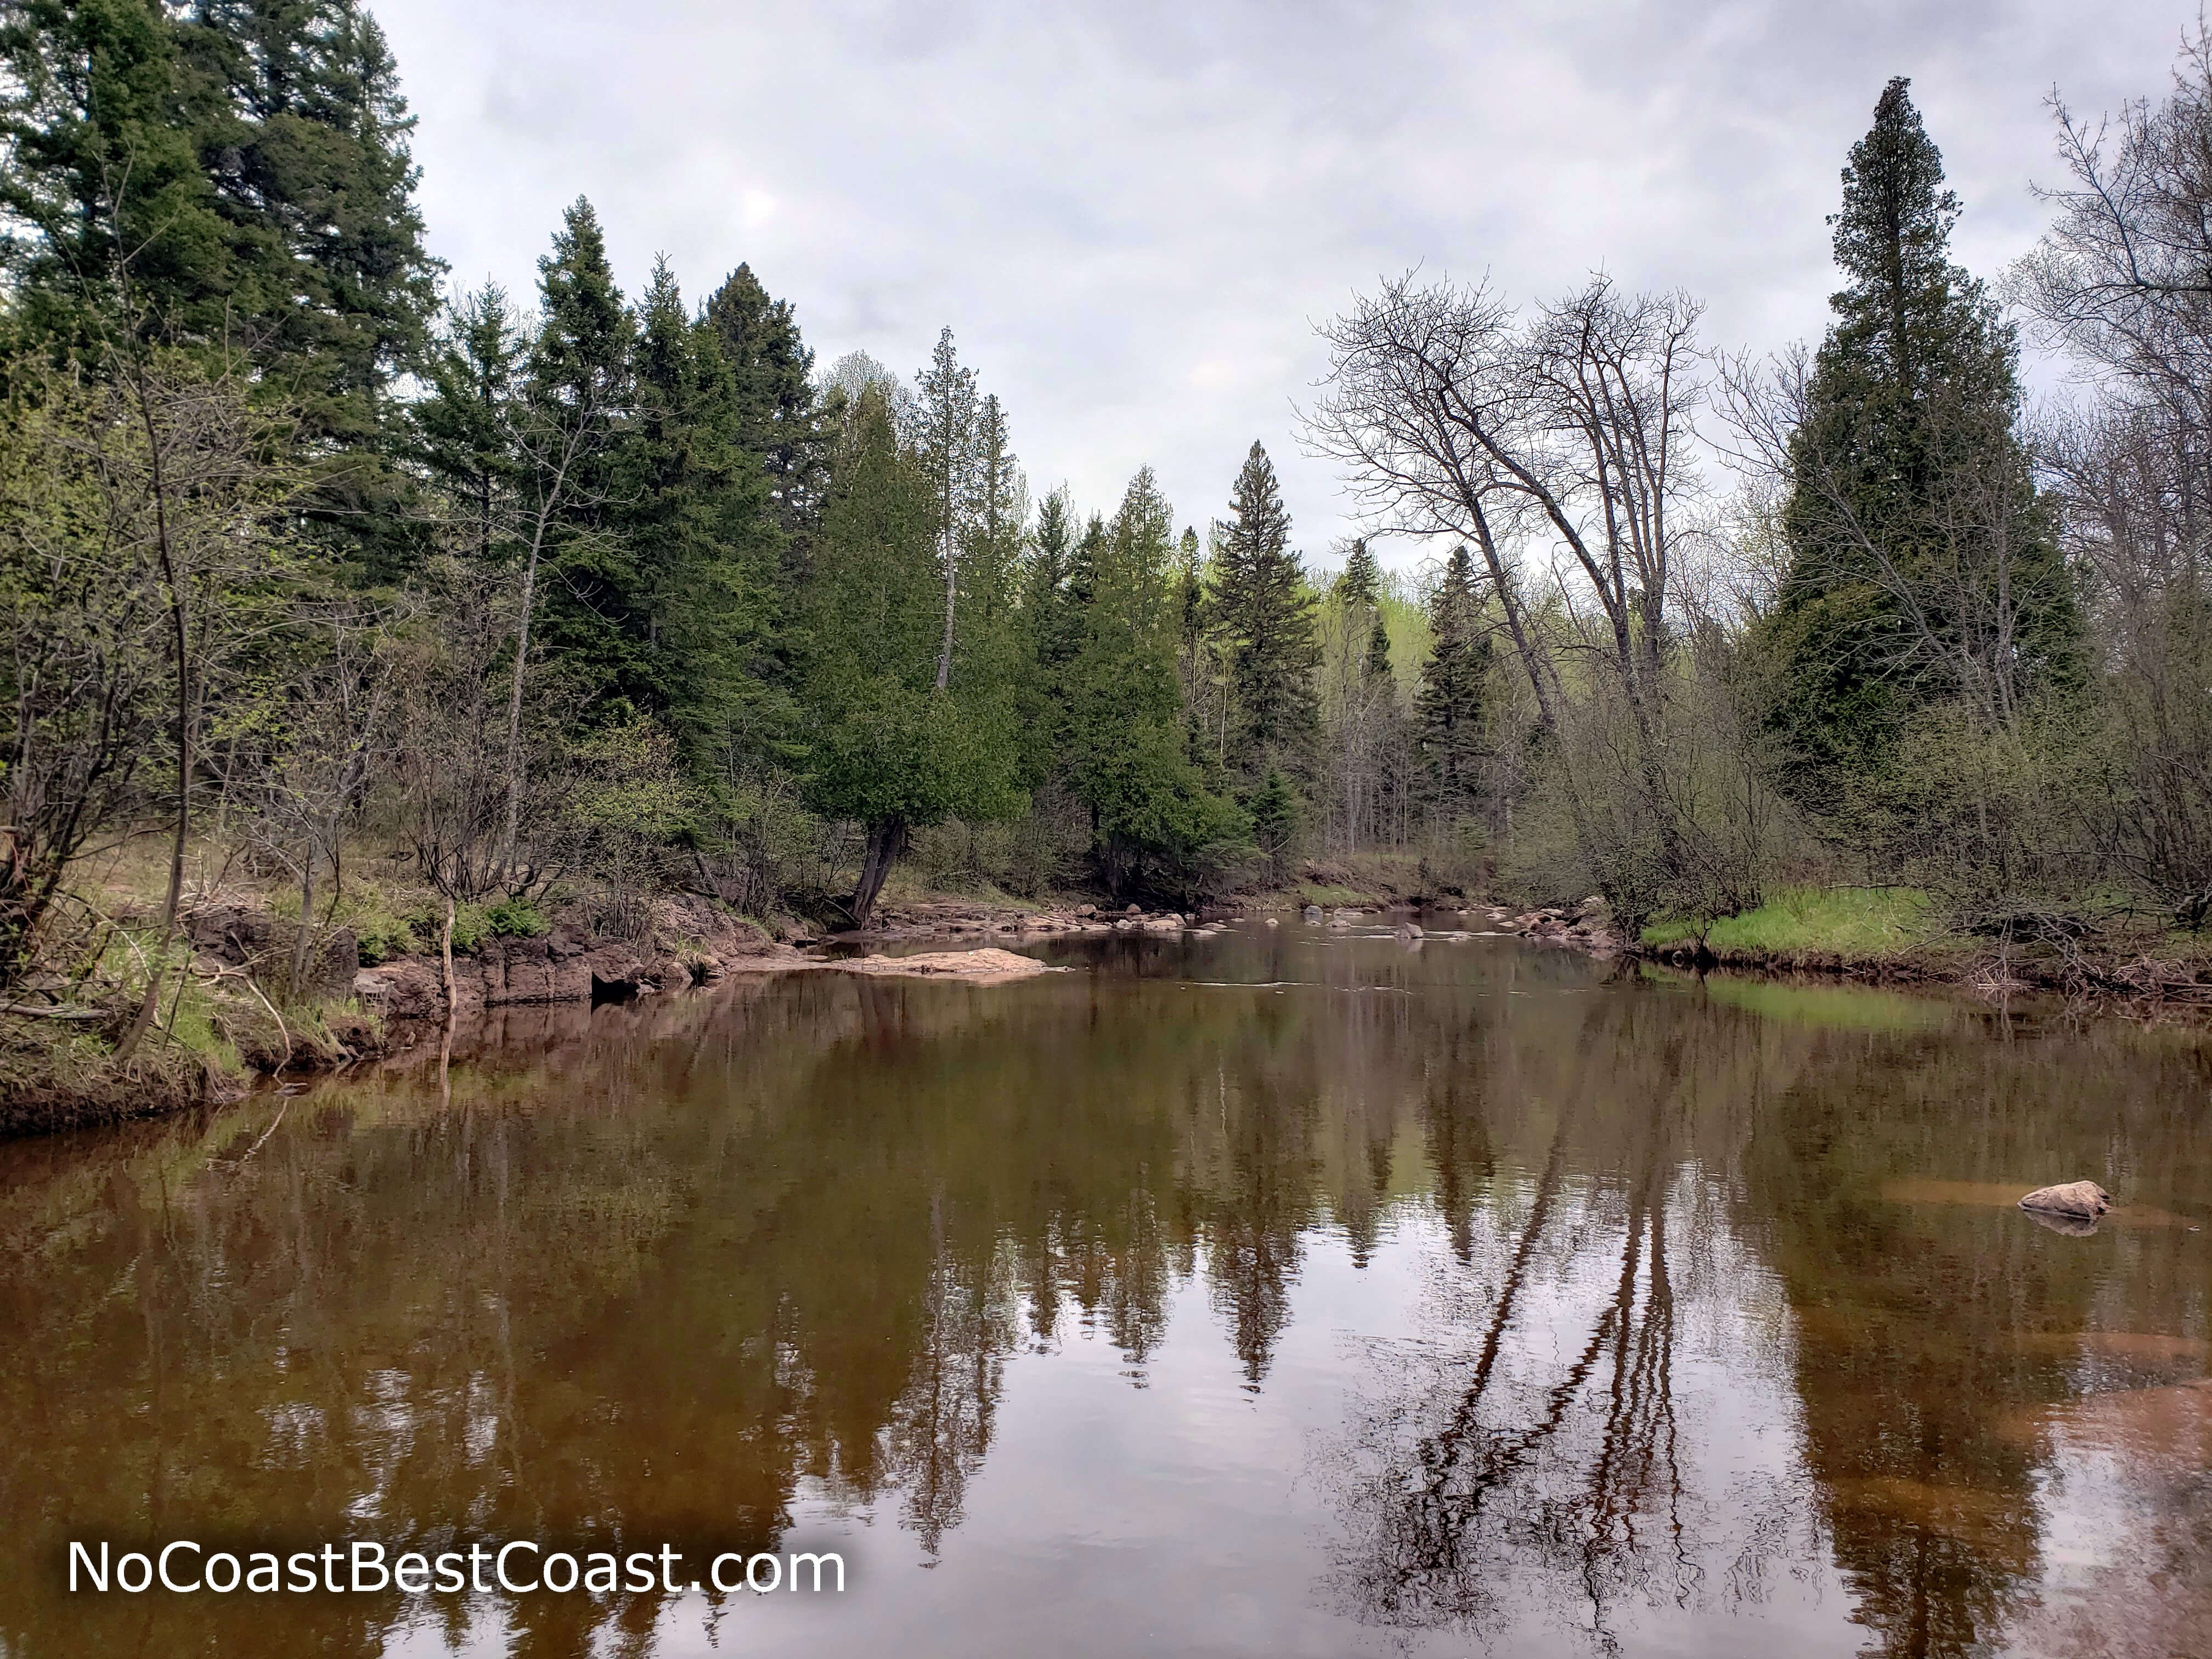 The Gooseberry River is quite calm between the falls